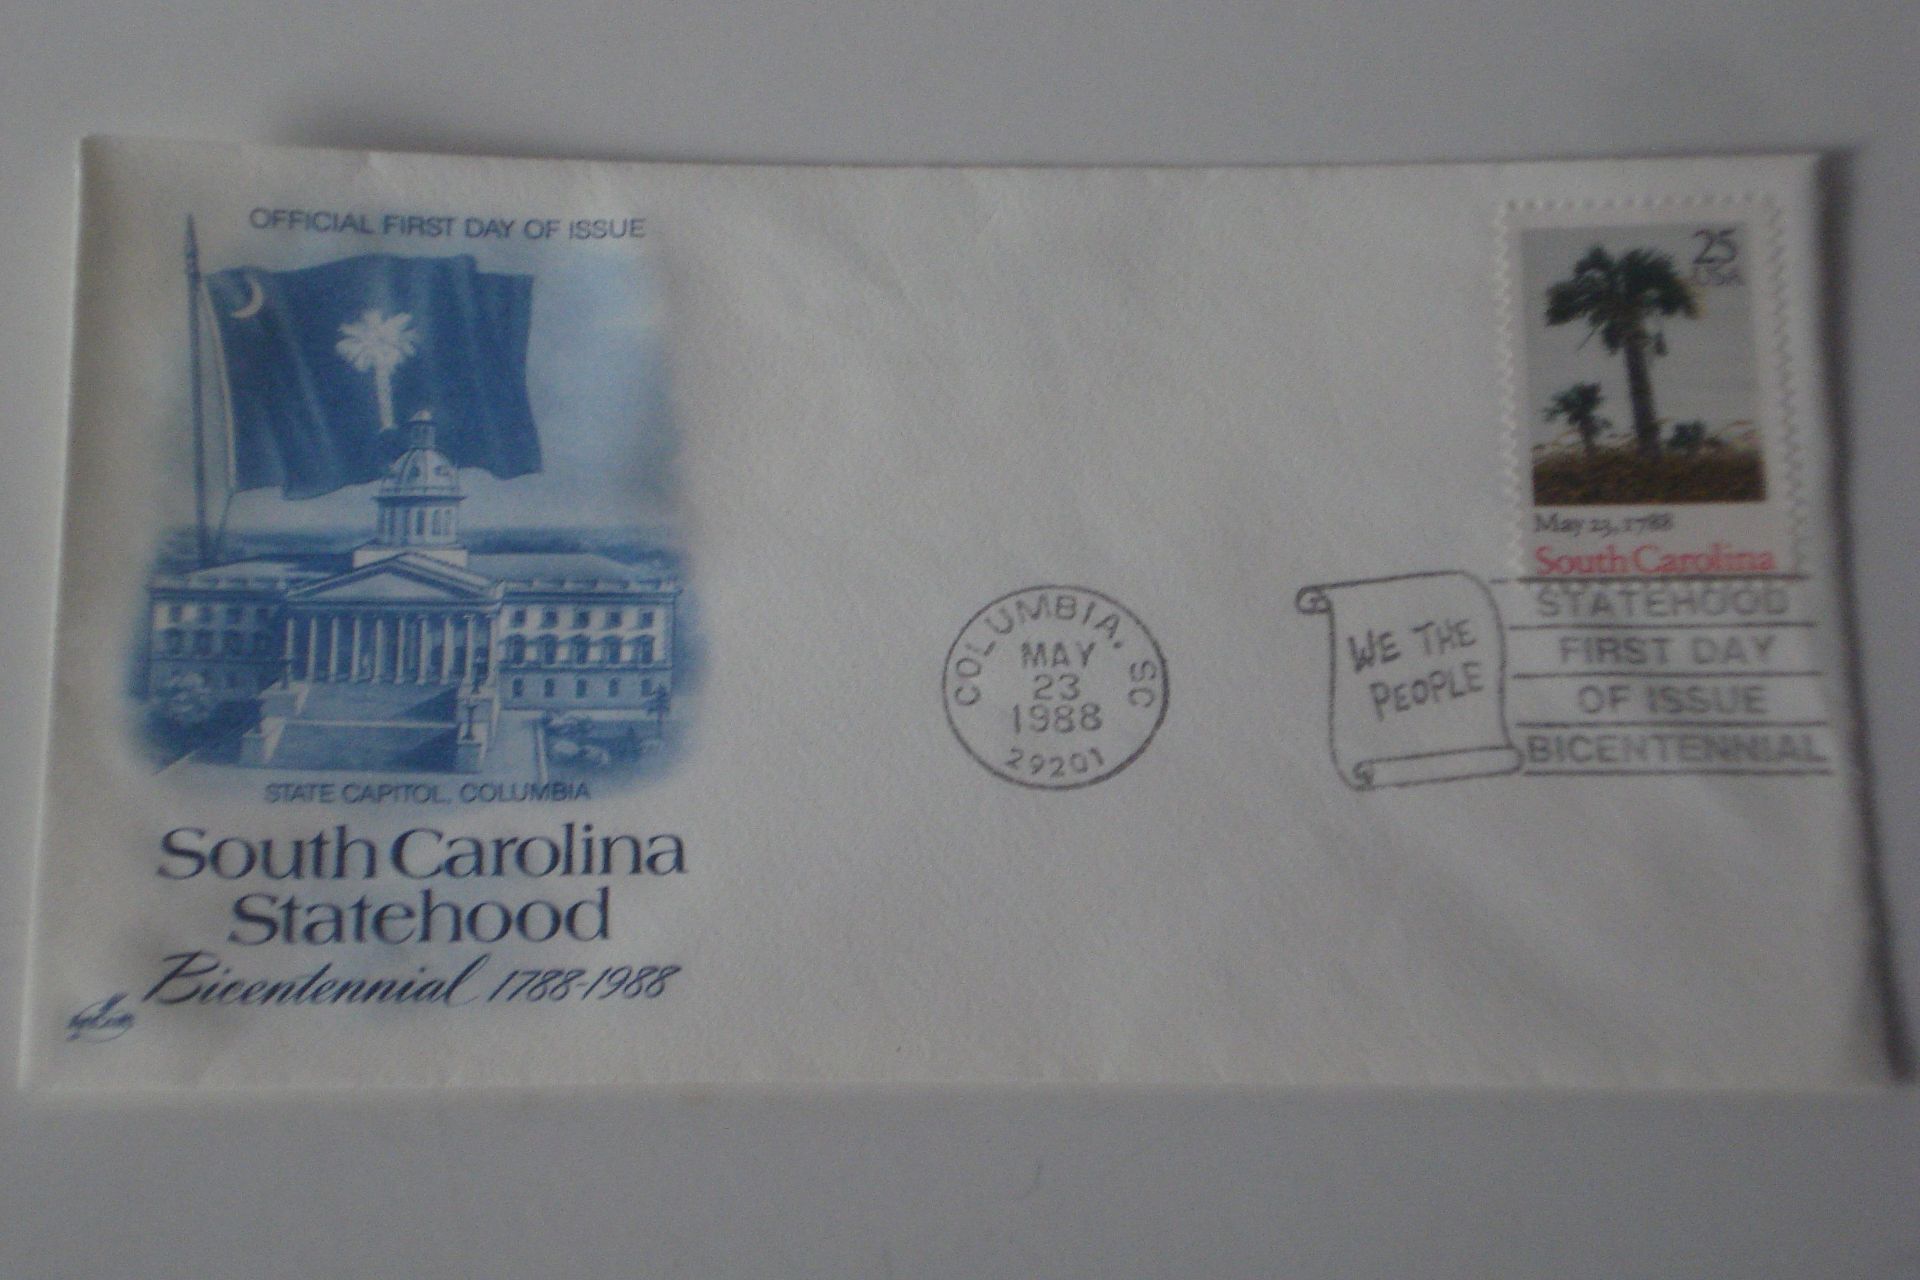 South Carolina Bi-Centennial of Statehood 1988 USA first day of issue commemorative stamp cover